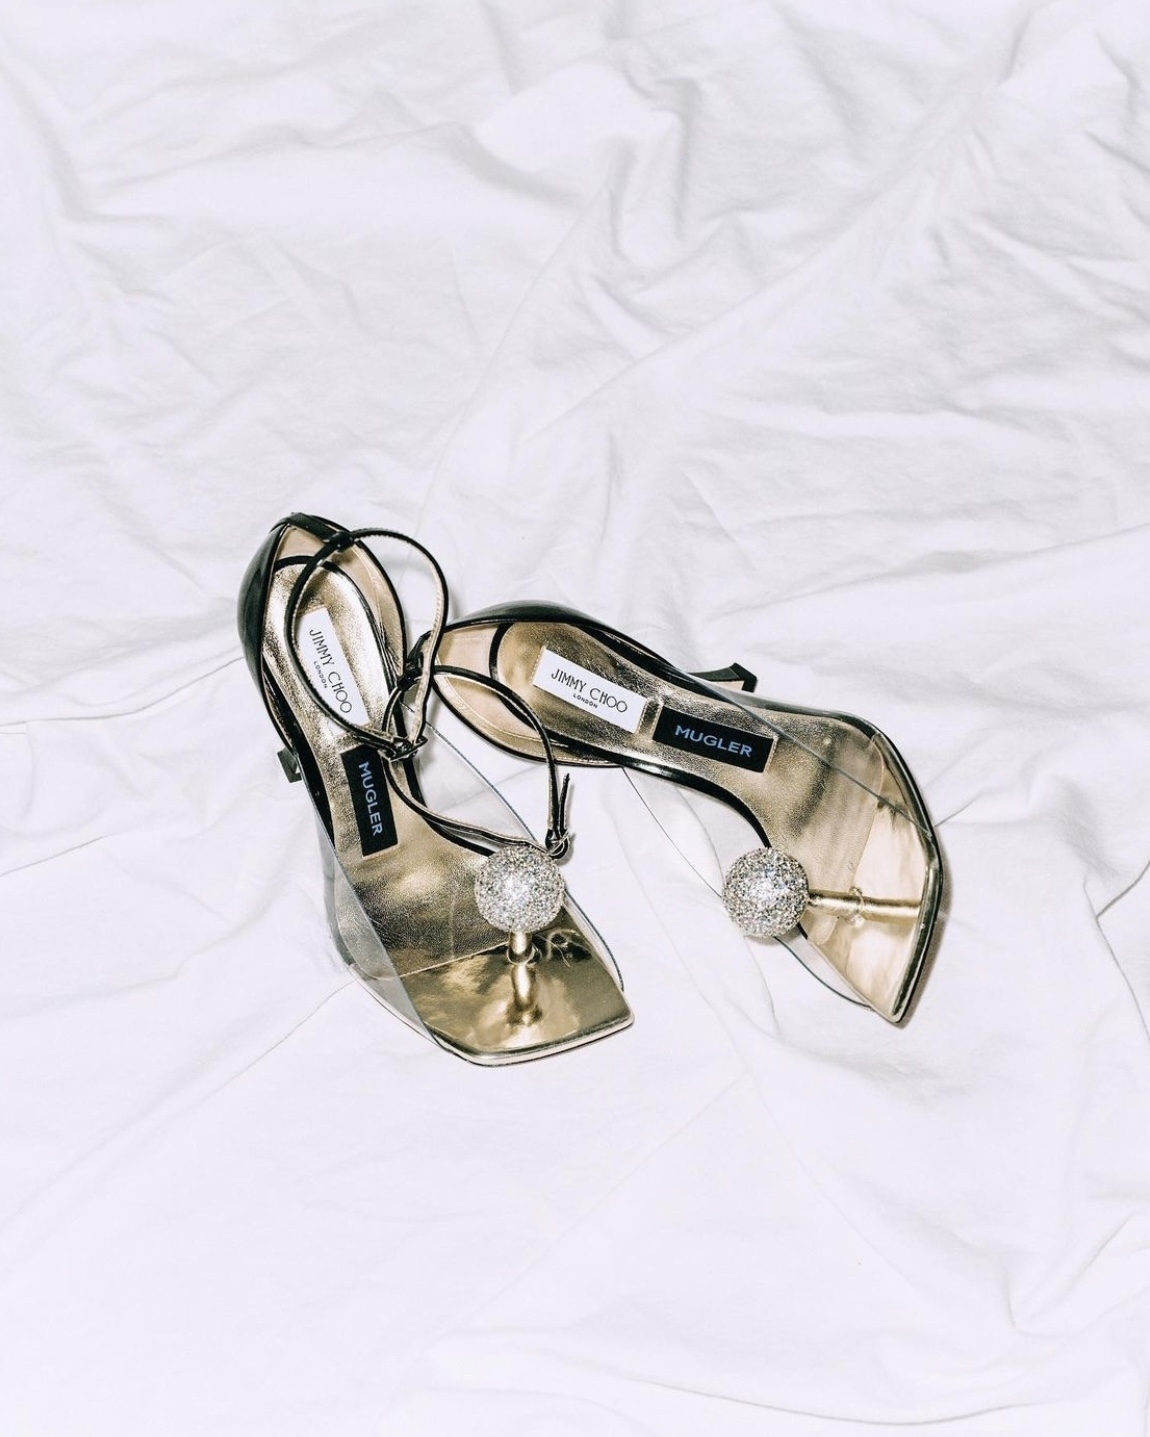 On-trend metallic bridal heels from Jimmy Choo's new bridal collection